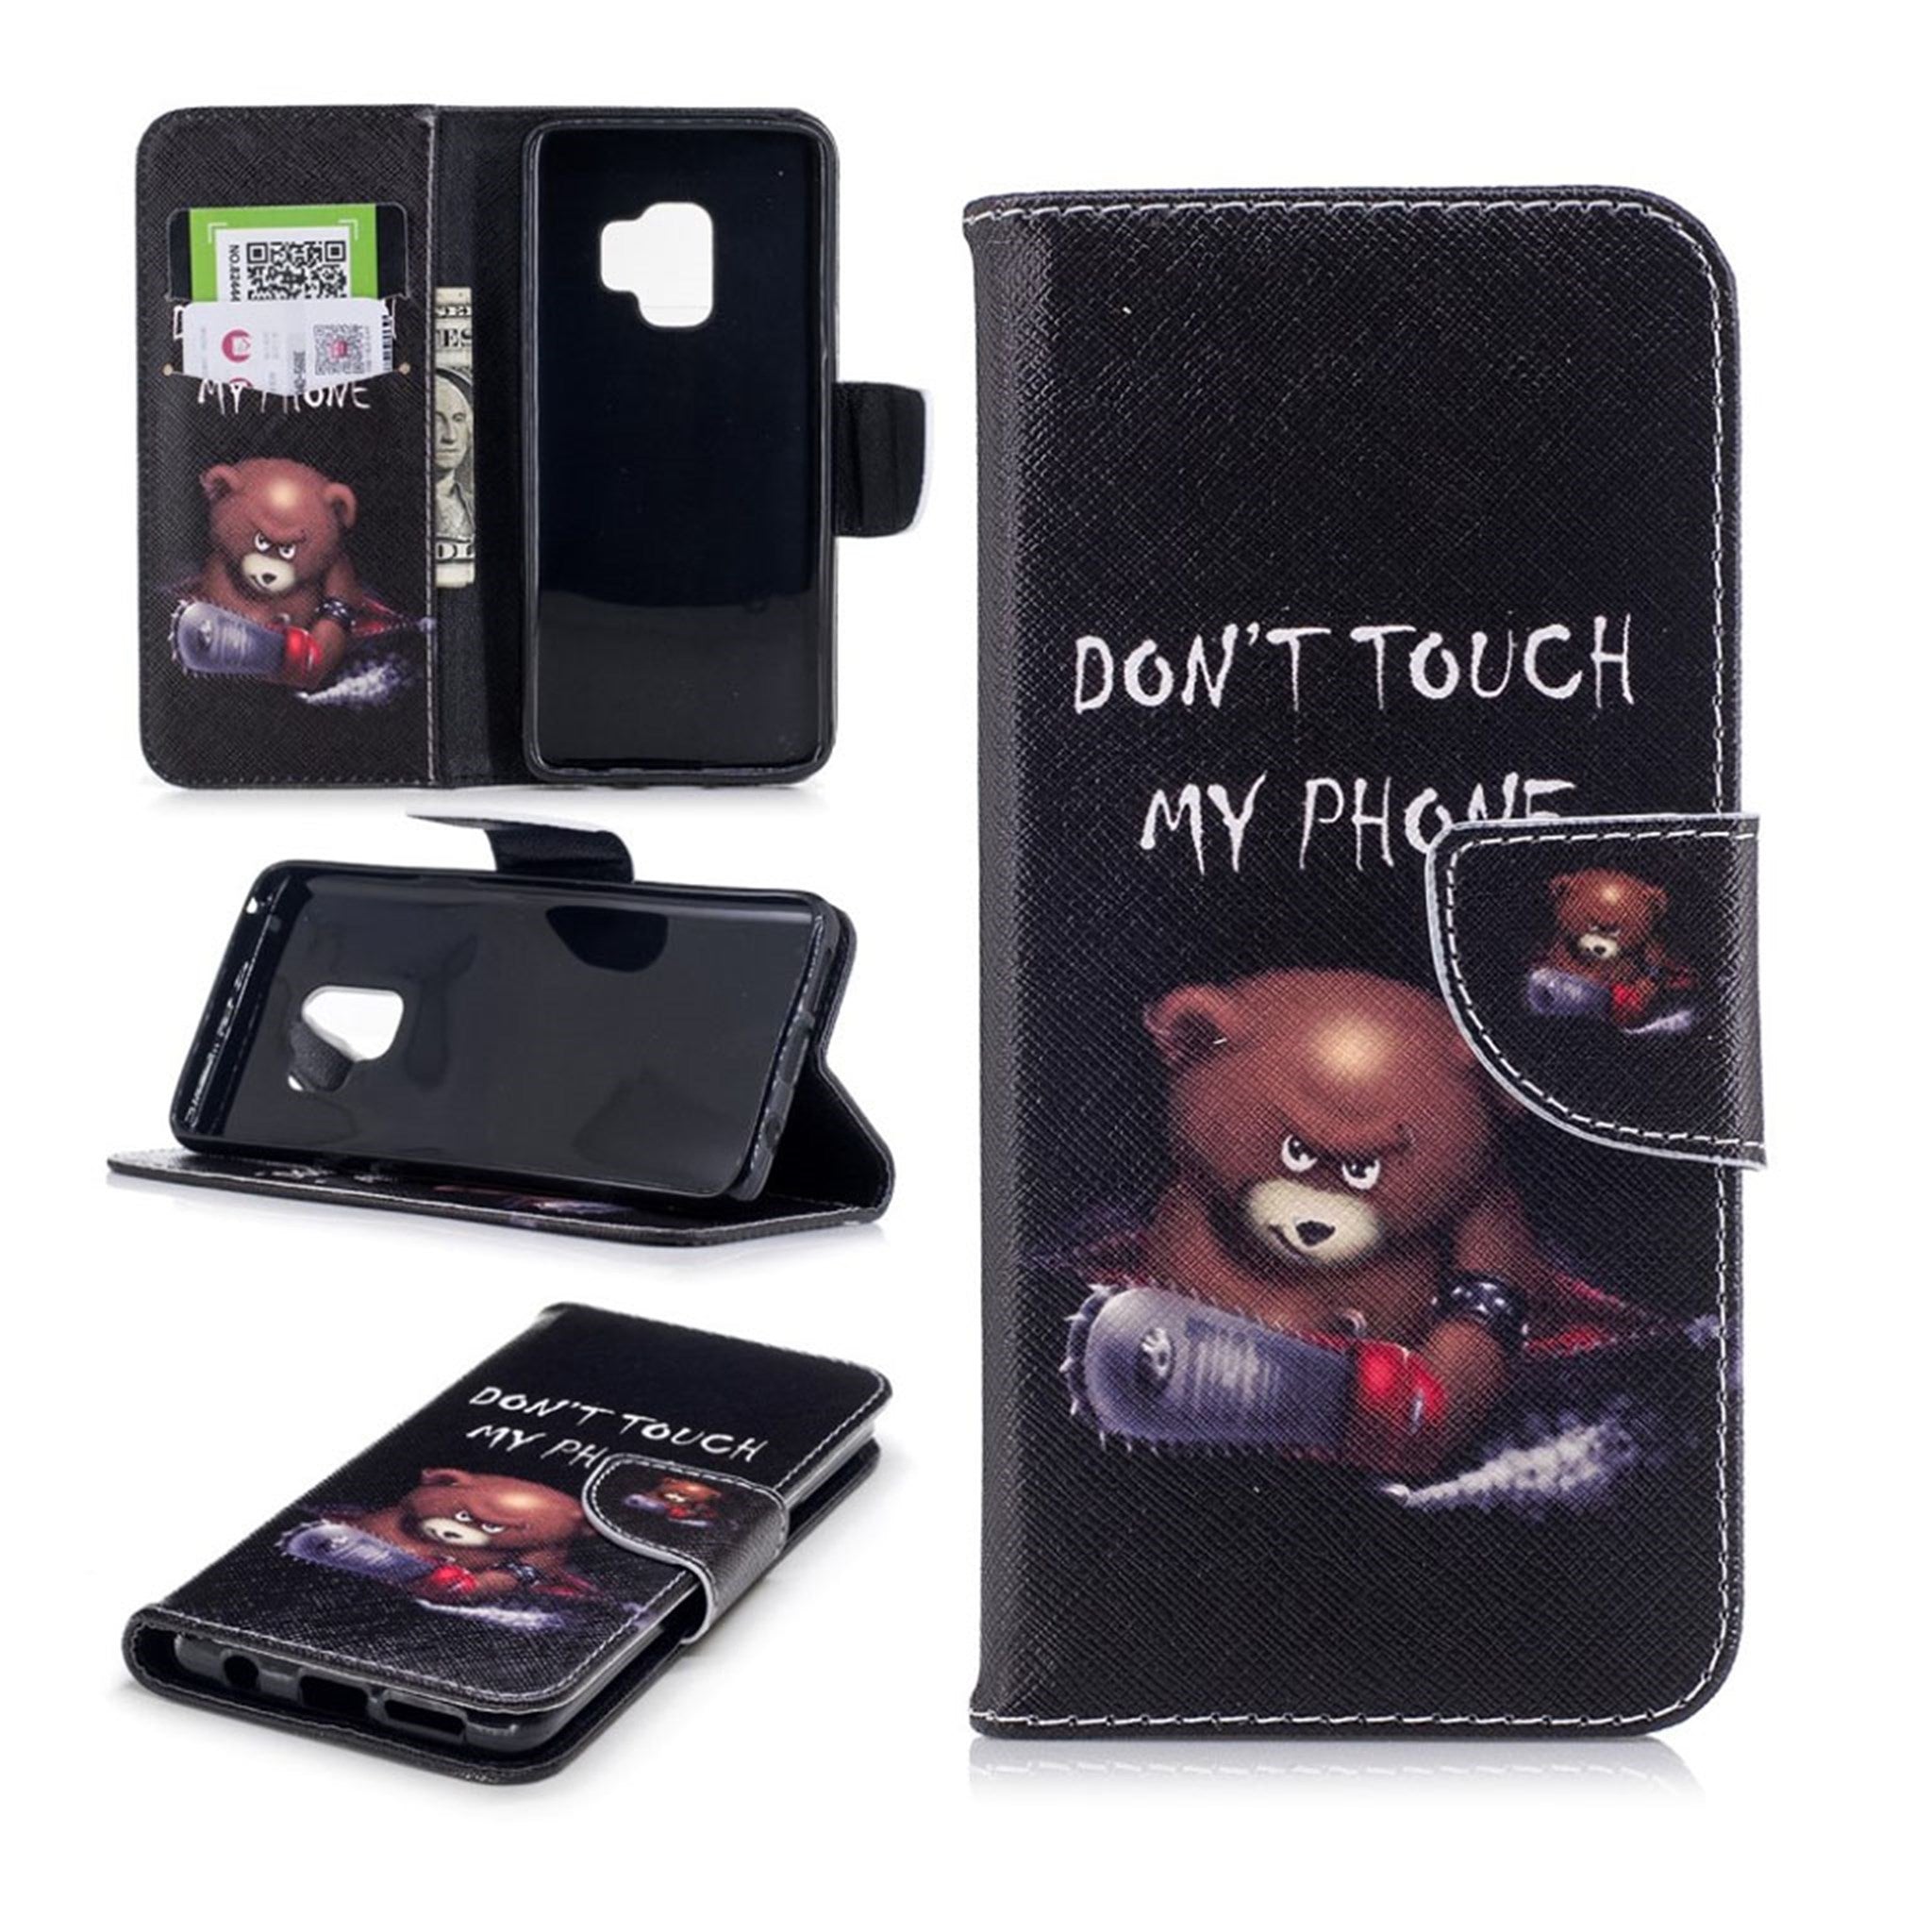 Samsung Galaxy S9 pattern printing leather case - Brown Bear and Warning Words